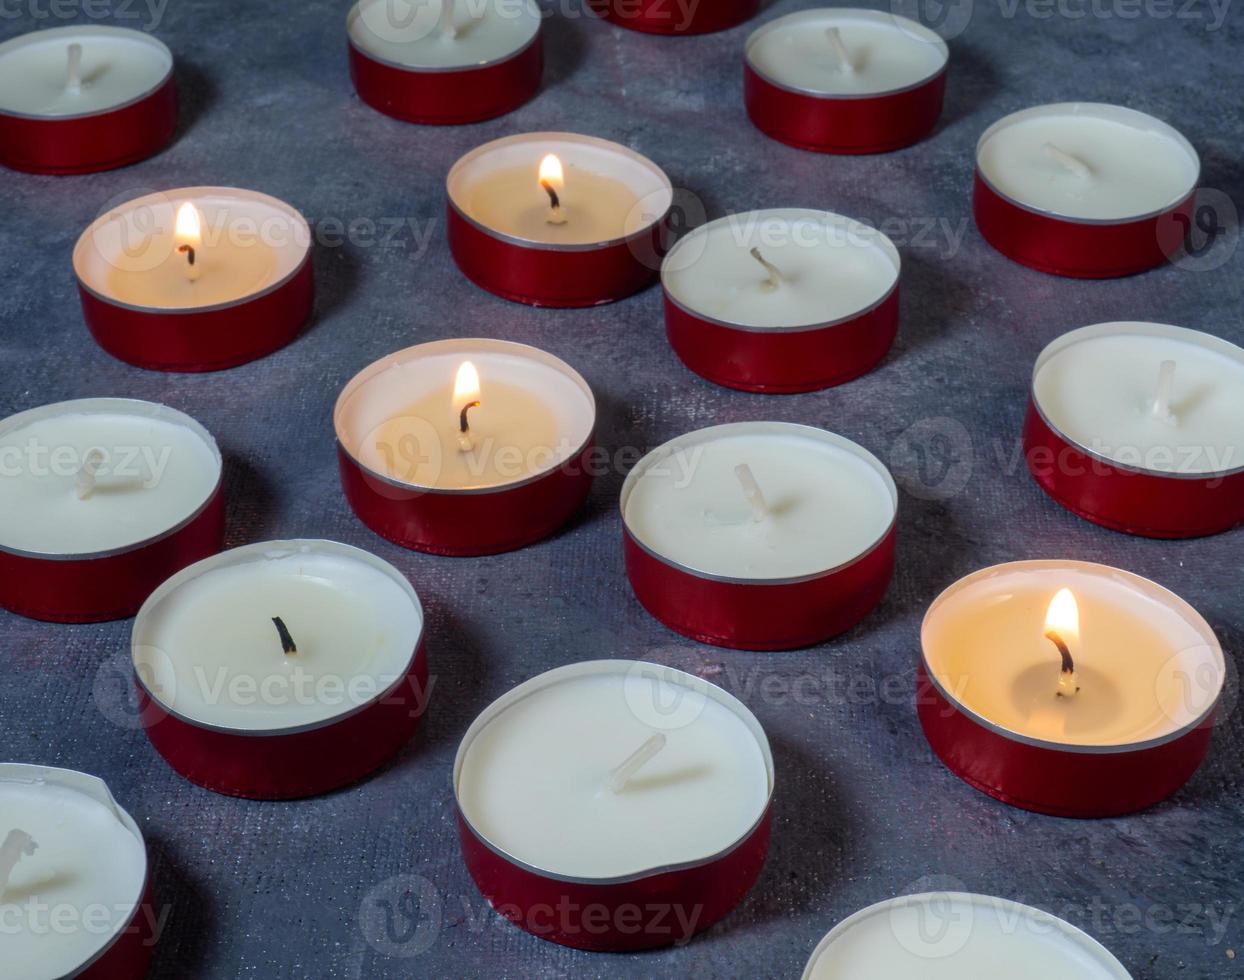 https://static.vecteezy.com/system/resources/previews/012/813/201/non_2x/short-candles-are-burning-against-a-dark-background-lots-of-small-candles-not-all-candles-are-lit-photo.jpg